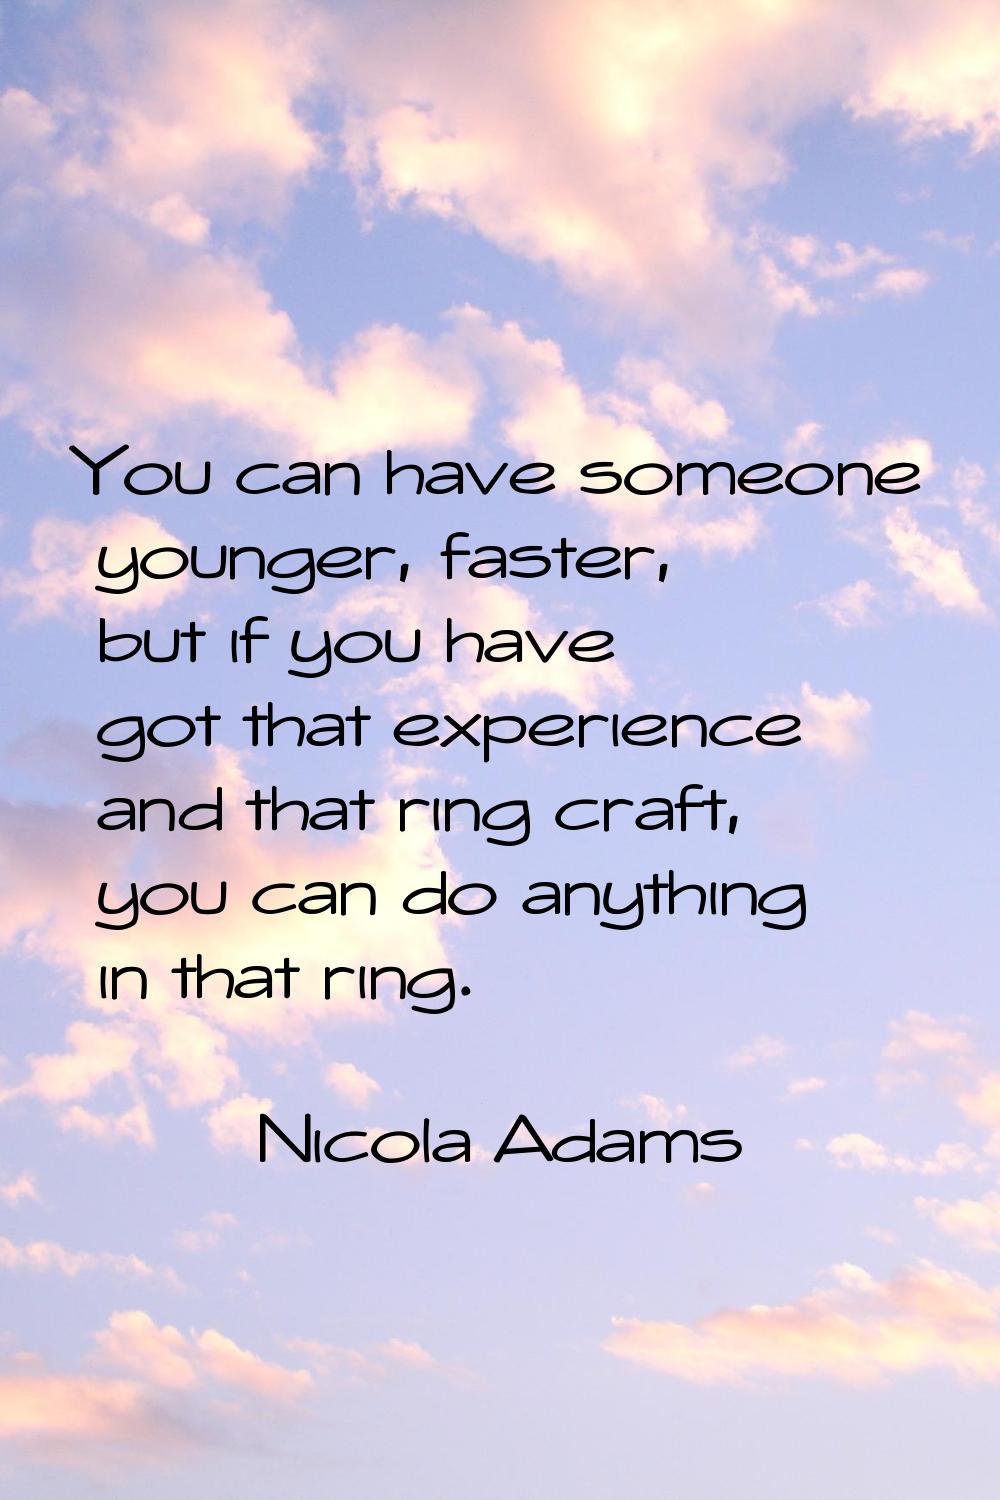 You can have someone younger, faster, but if you have got that experience and that ring craft, you 